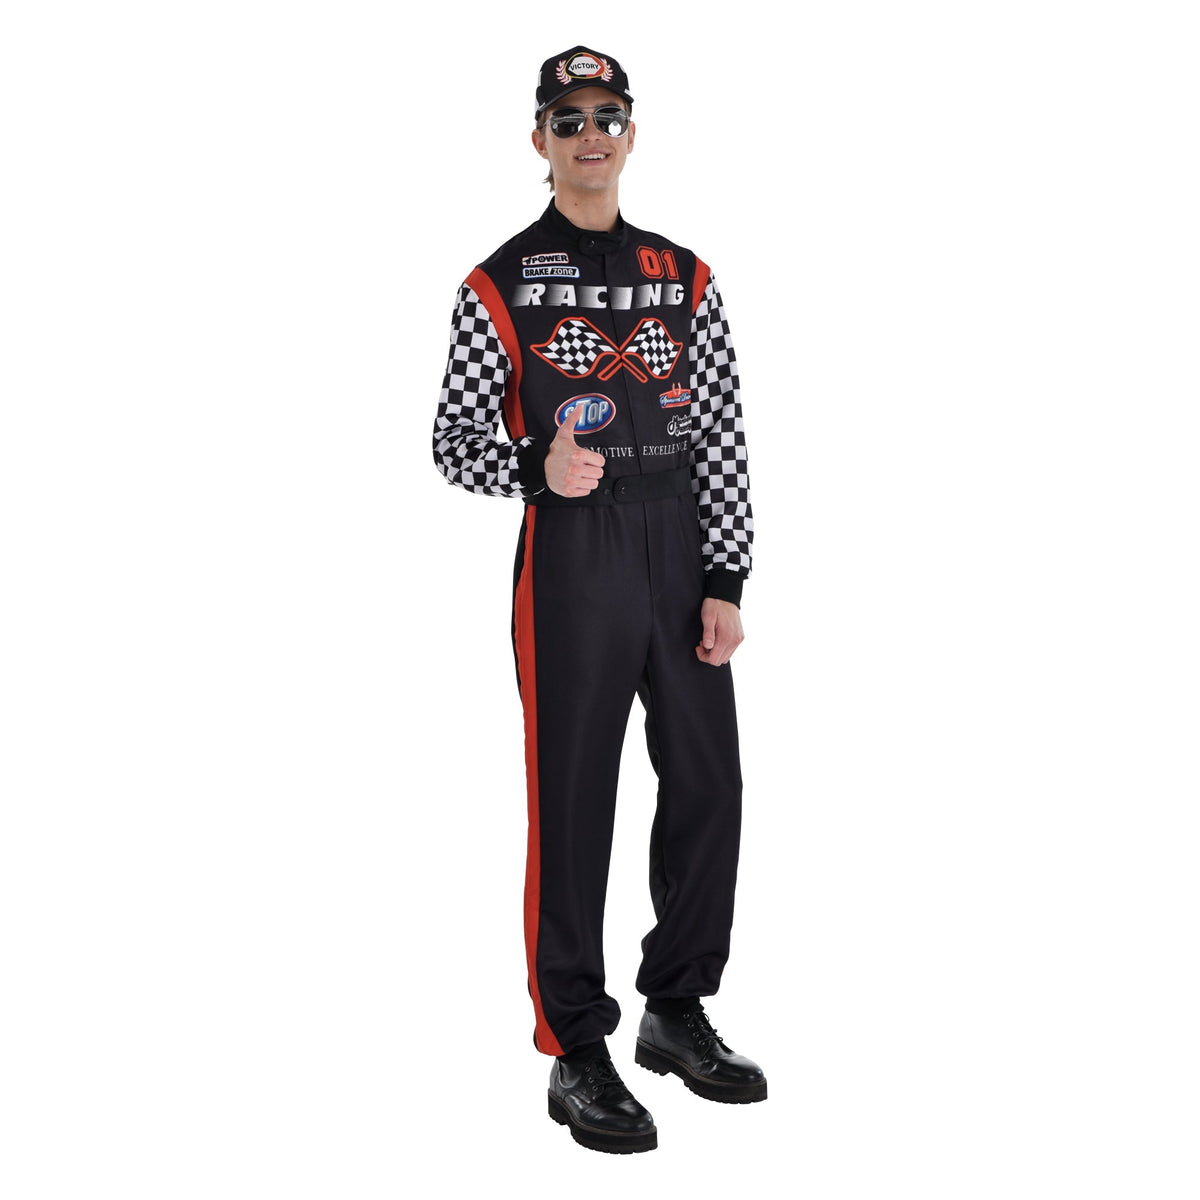 HALLOWEEN COSTUME CO. Costumes Racecar Driver Costume for Adults, Jumpsuit and Hat